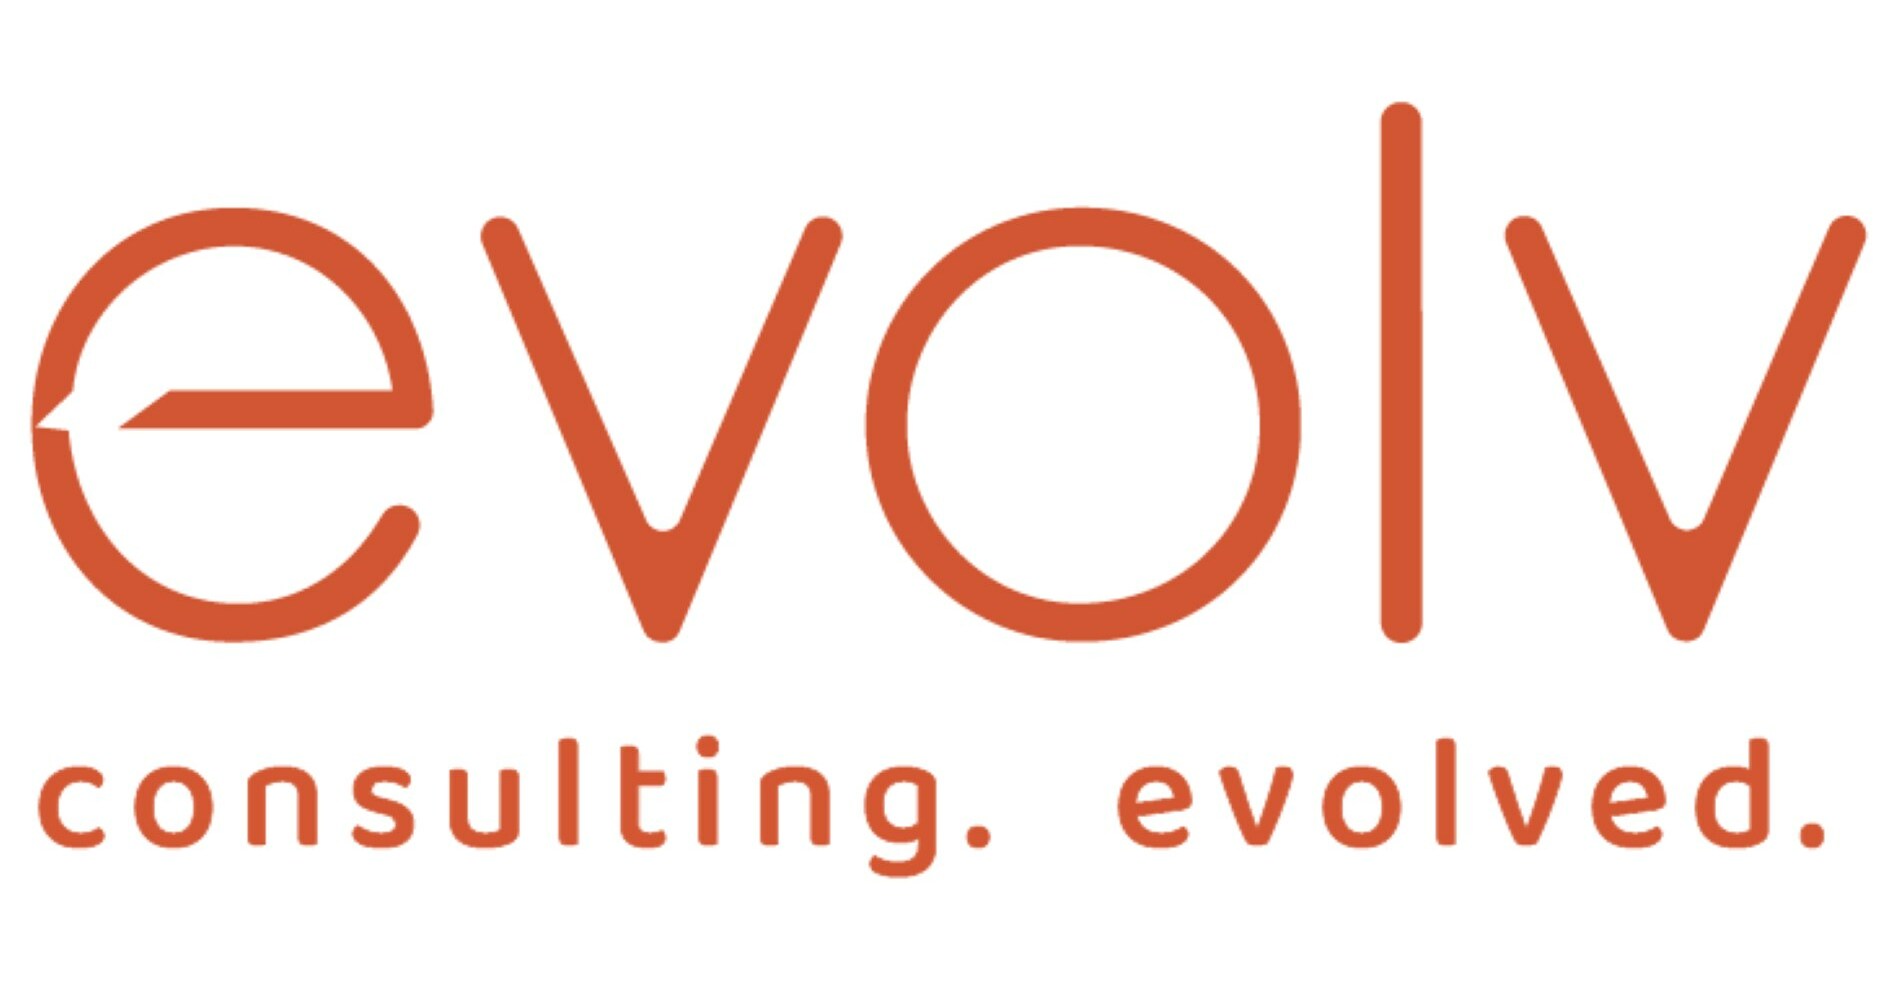 With a Two-Year Revenue Growth of 712%, evolv Consulting Ranks No. 14 ...